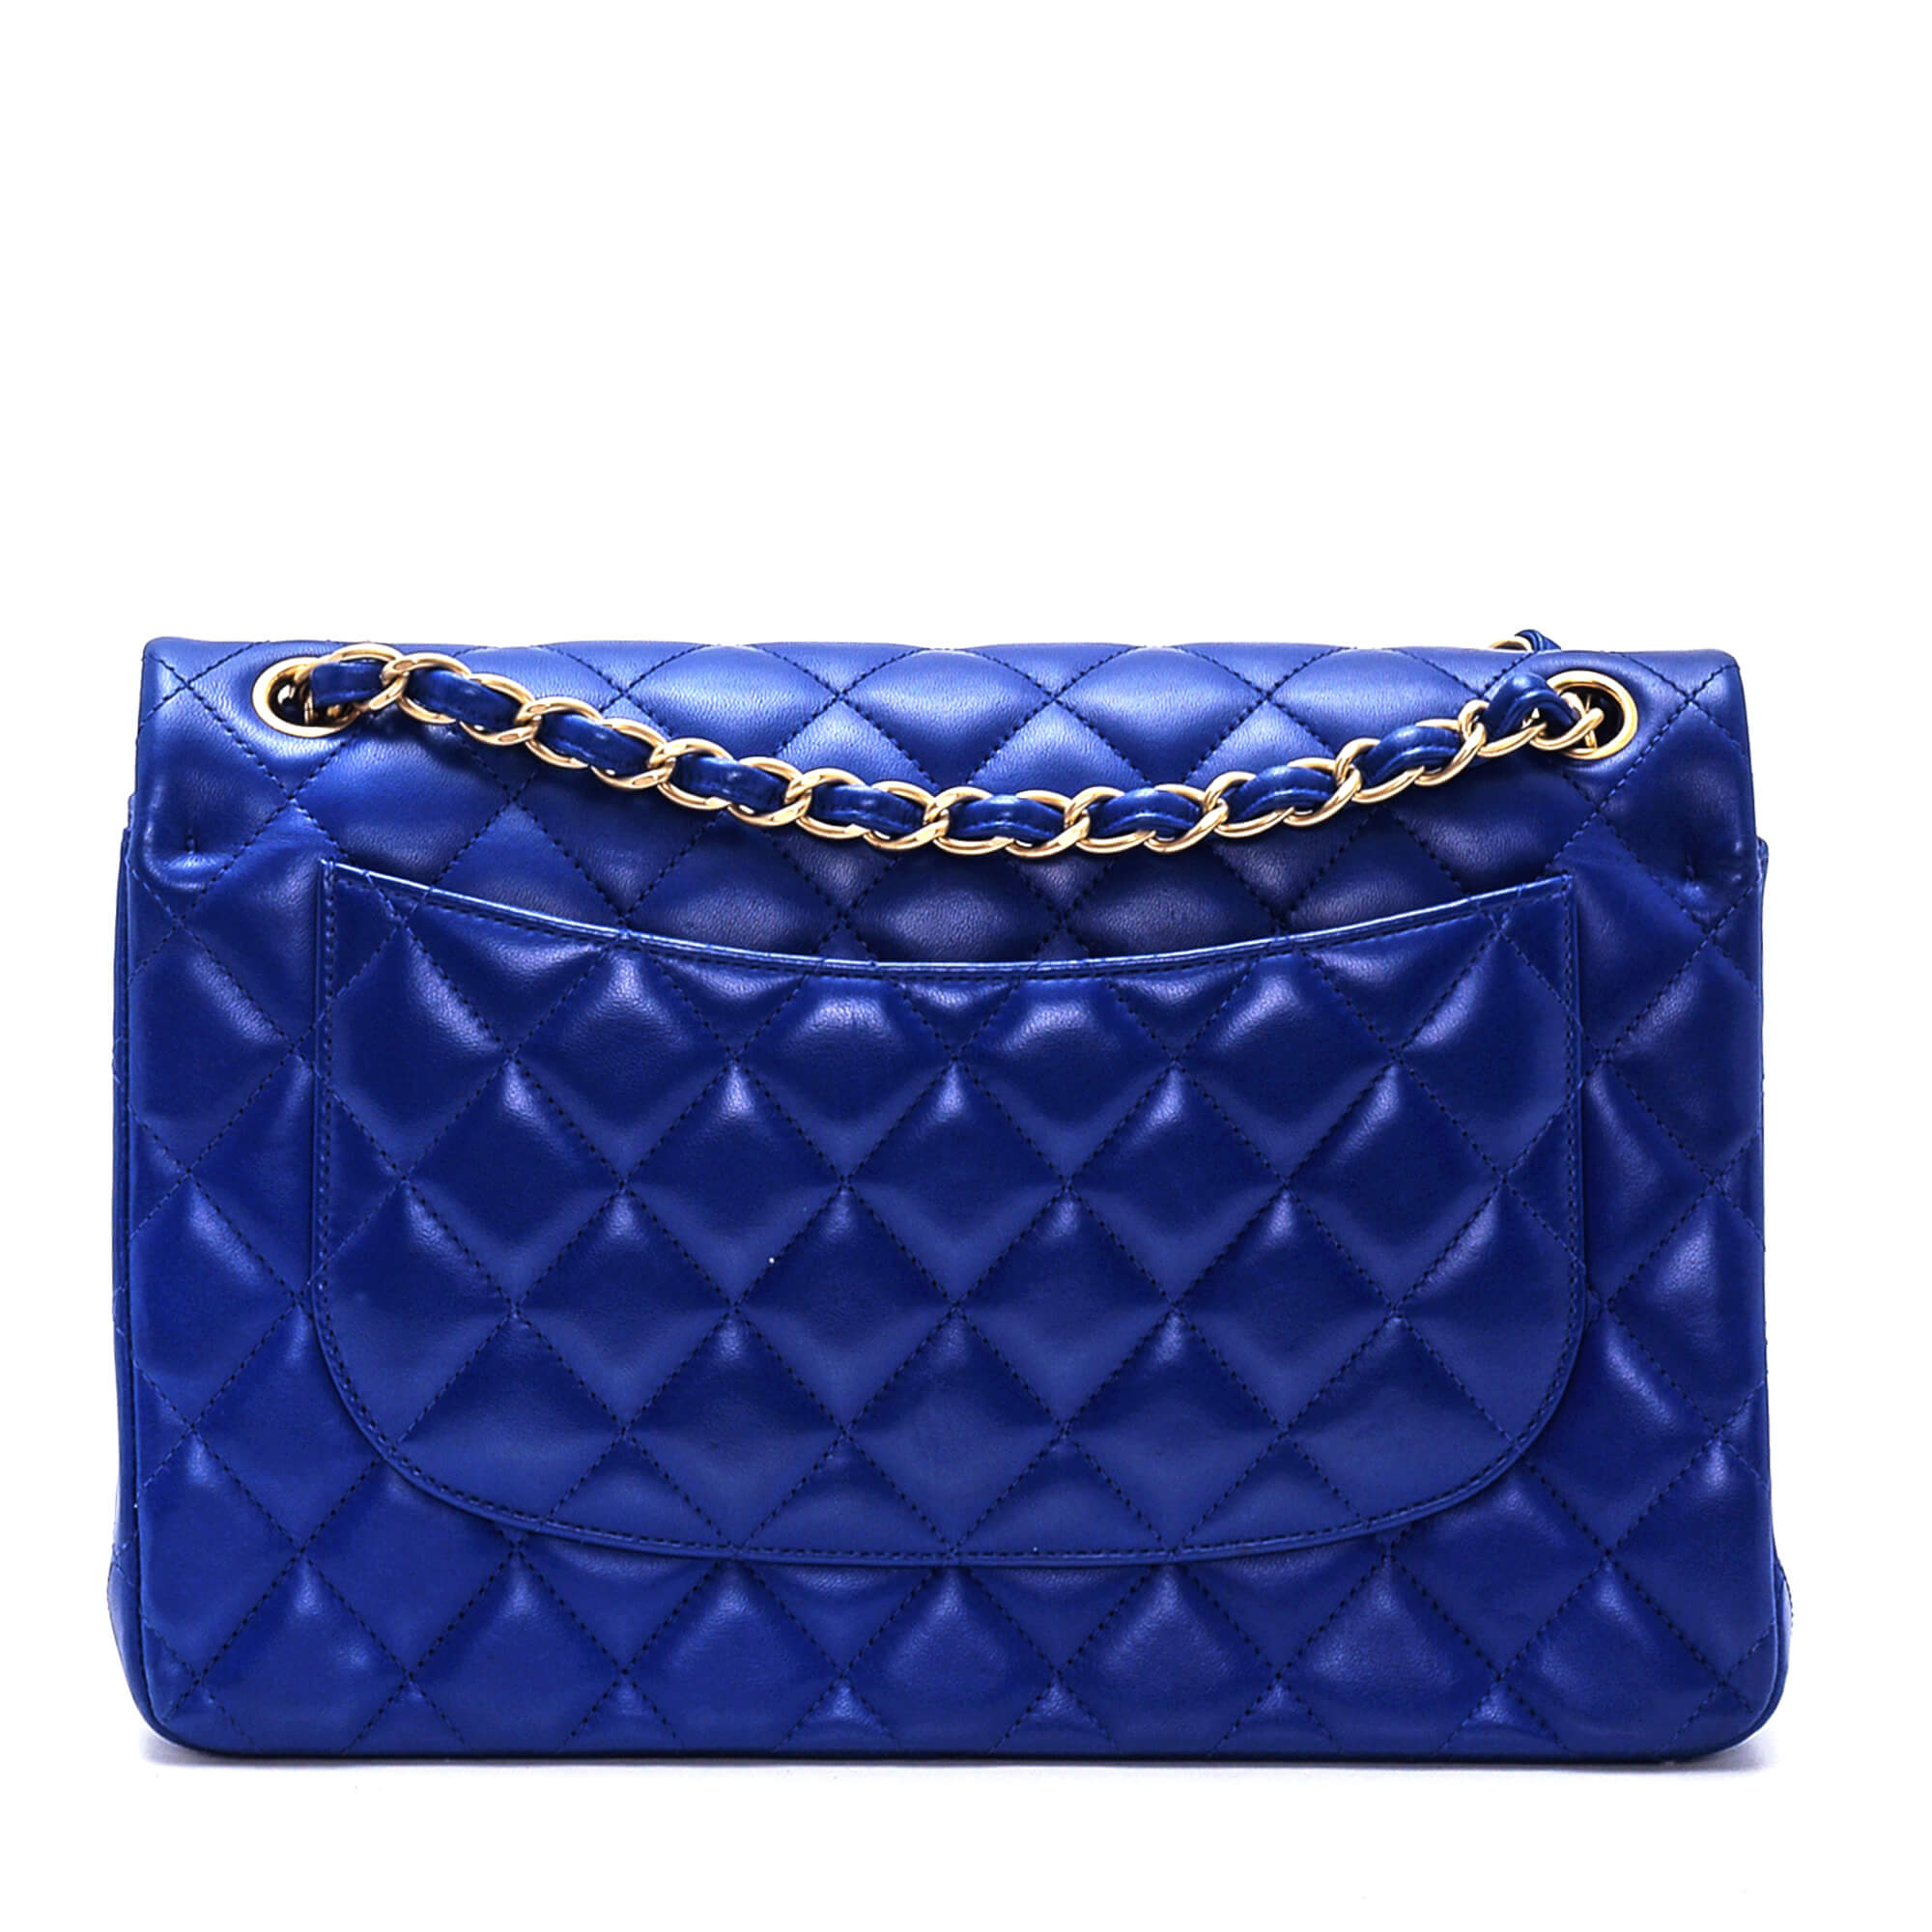 Chanel - Royal Blue Quilted Lambskin Leather Jumbo Double Flap Bag